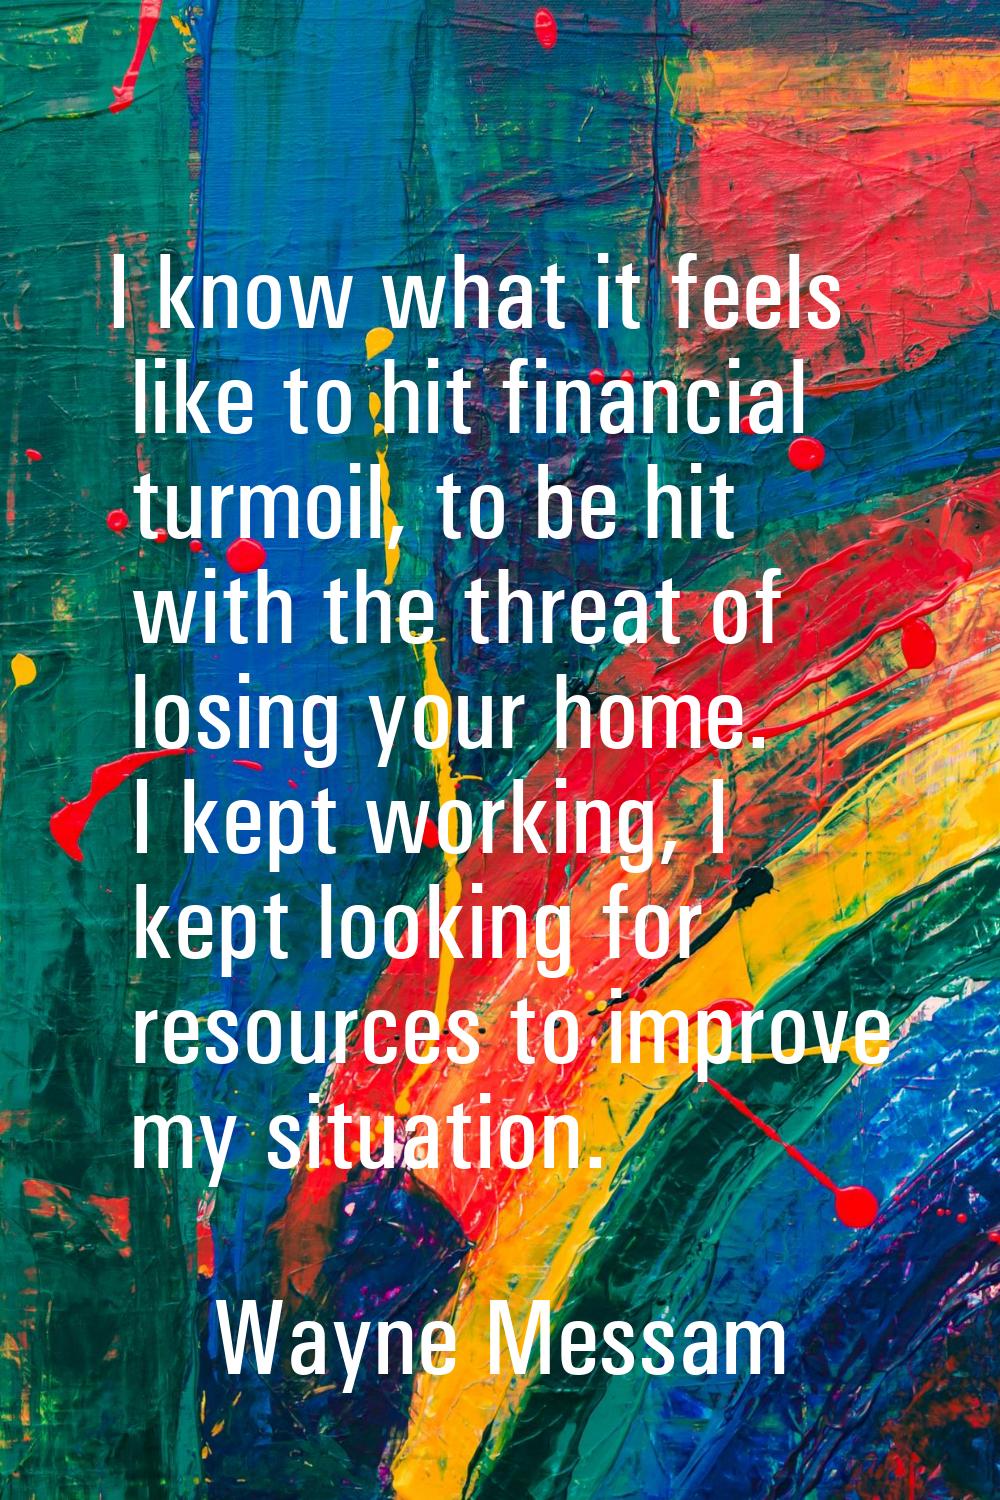 I know what it feels like to hit financial turmoil, to be hit with the threat of losing your home. 